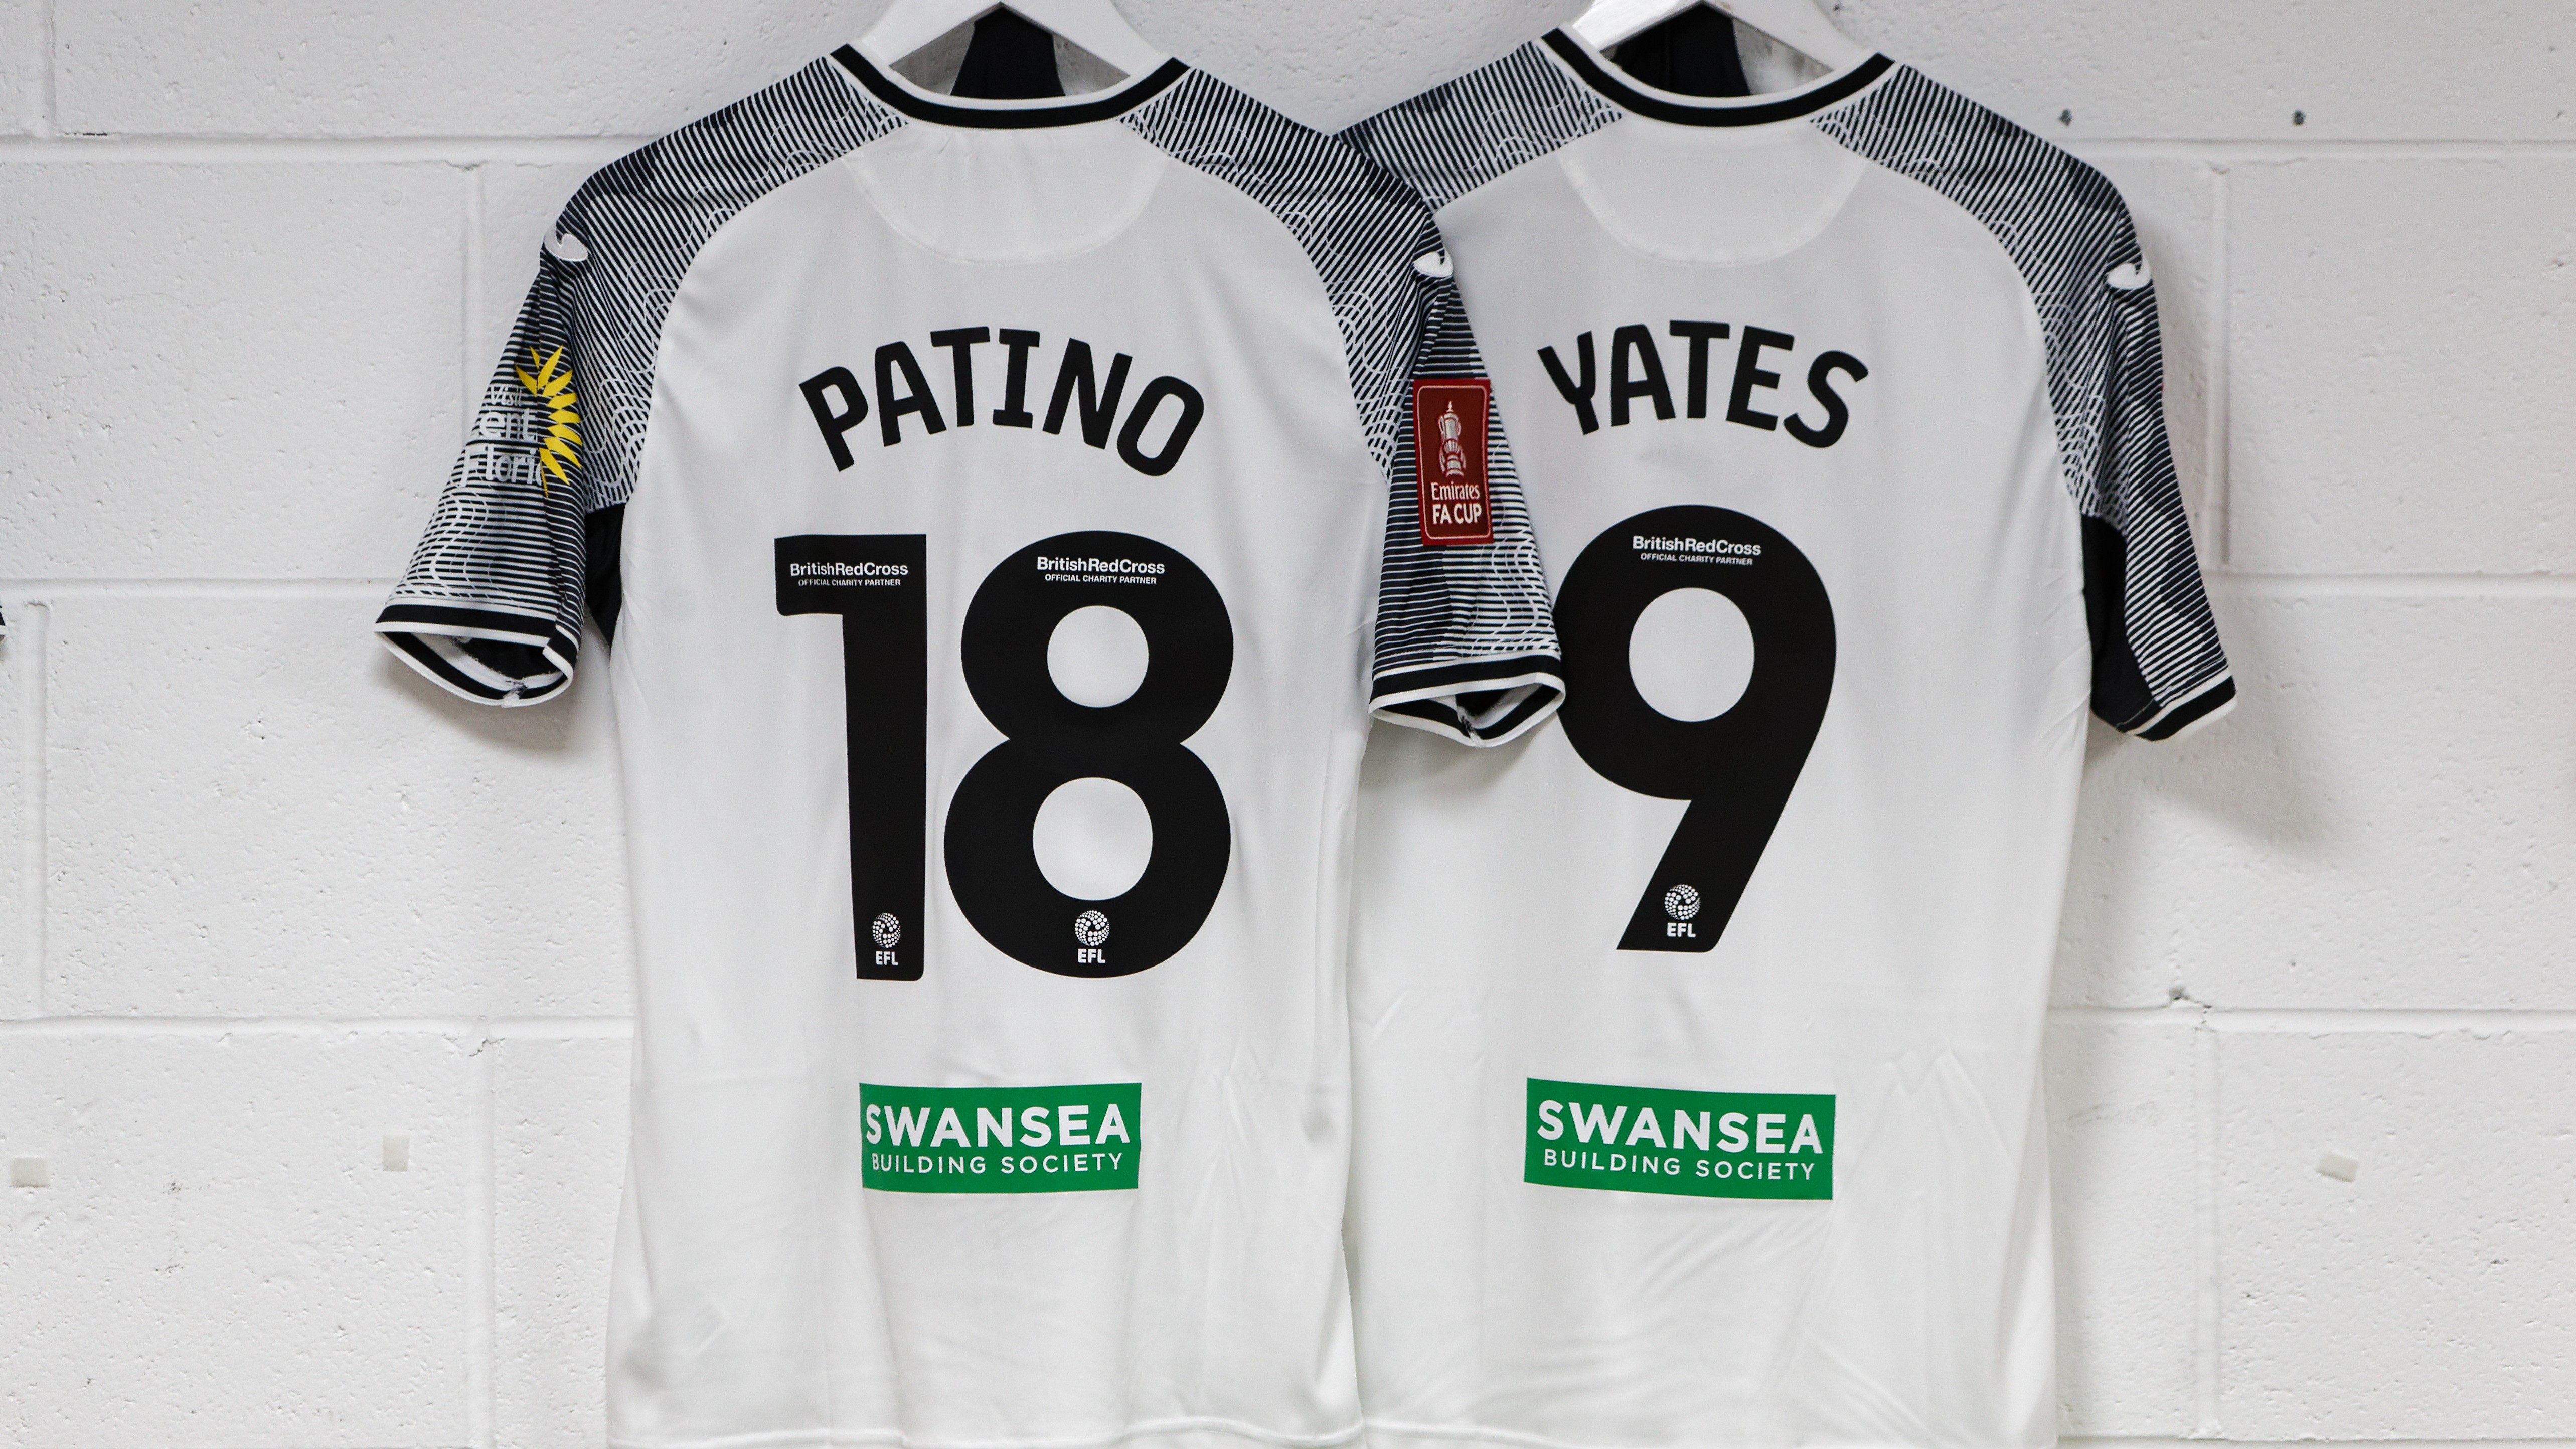 Patino and Yates shirts hanging in the changing room